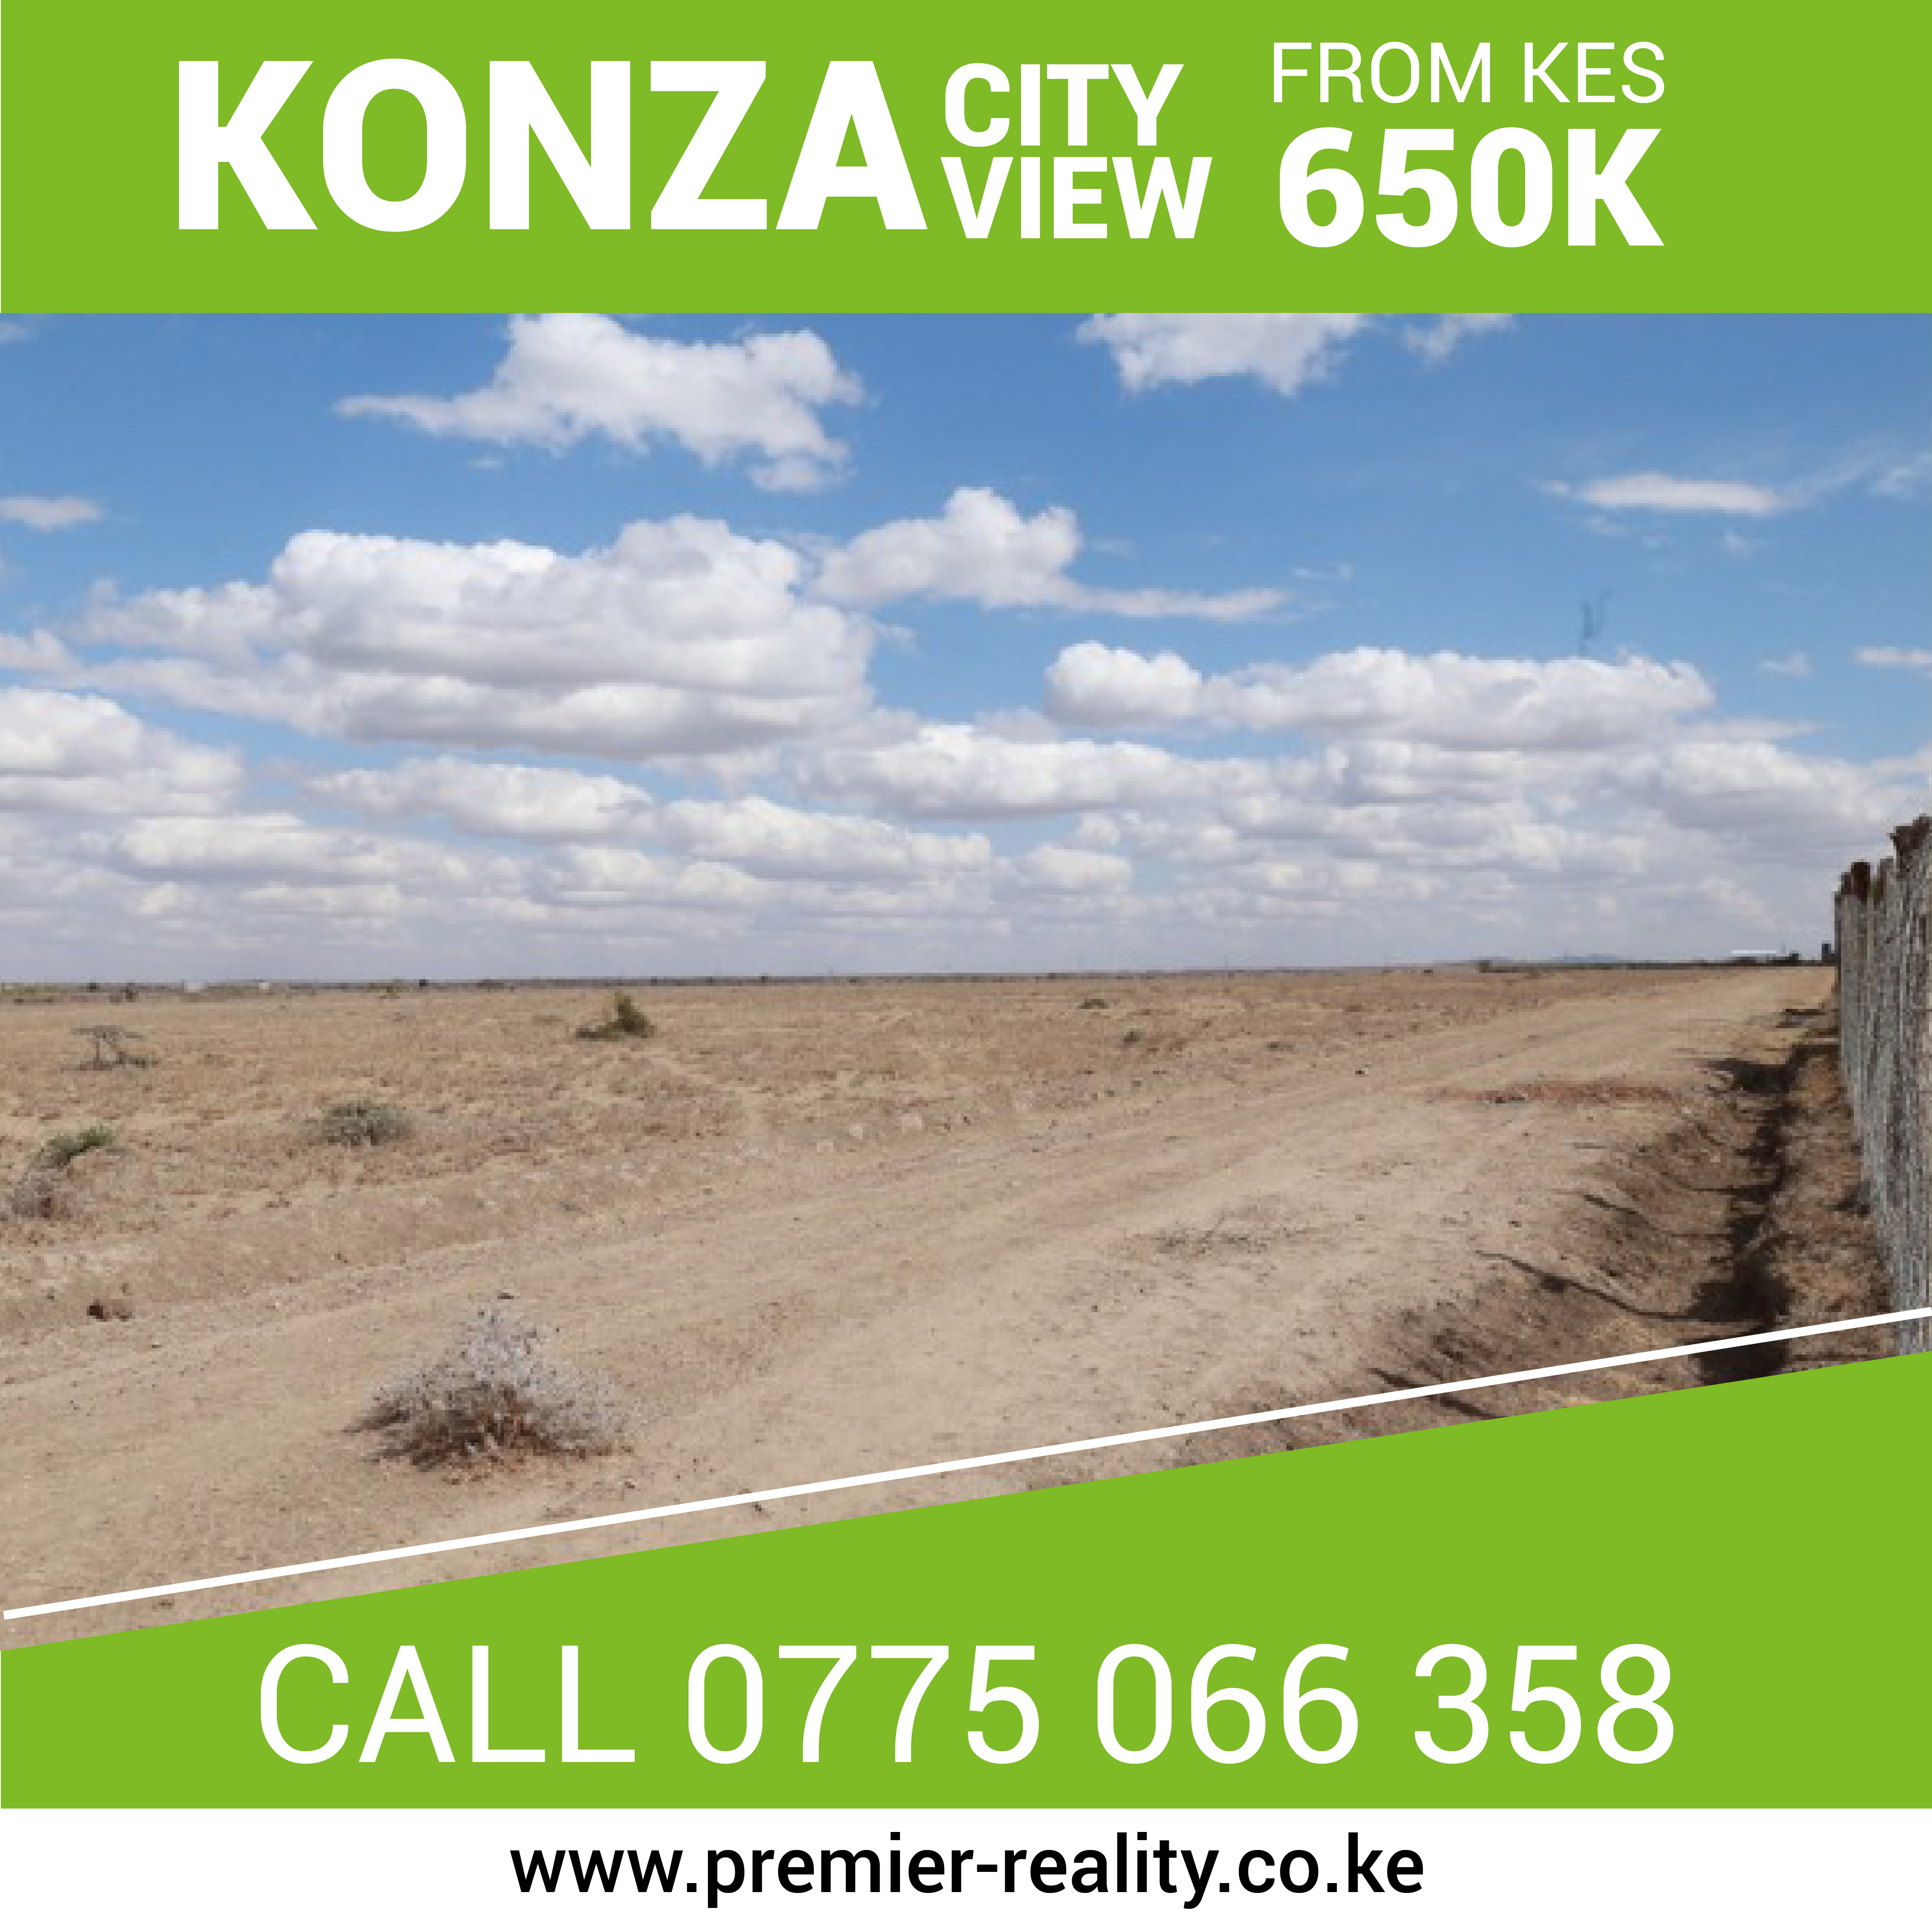 Invest in Konza City View